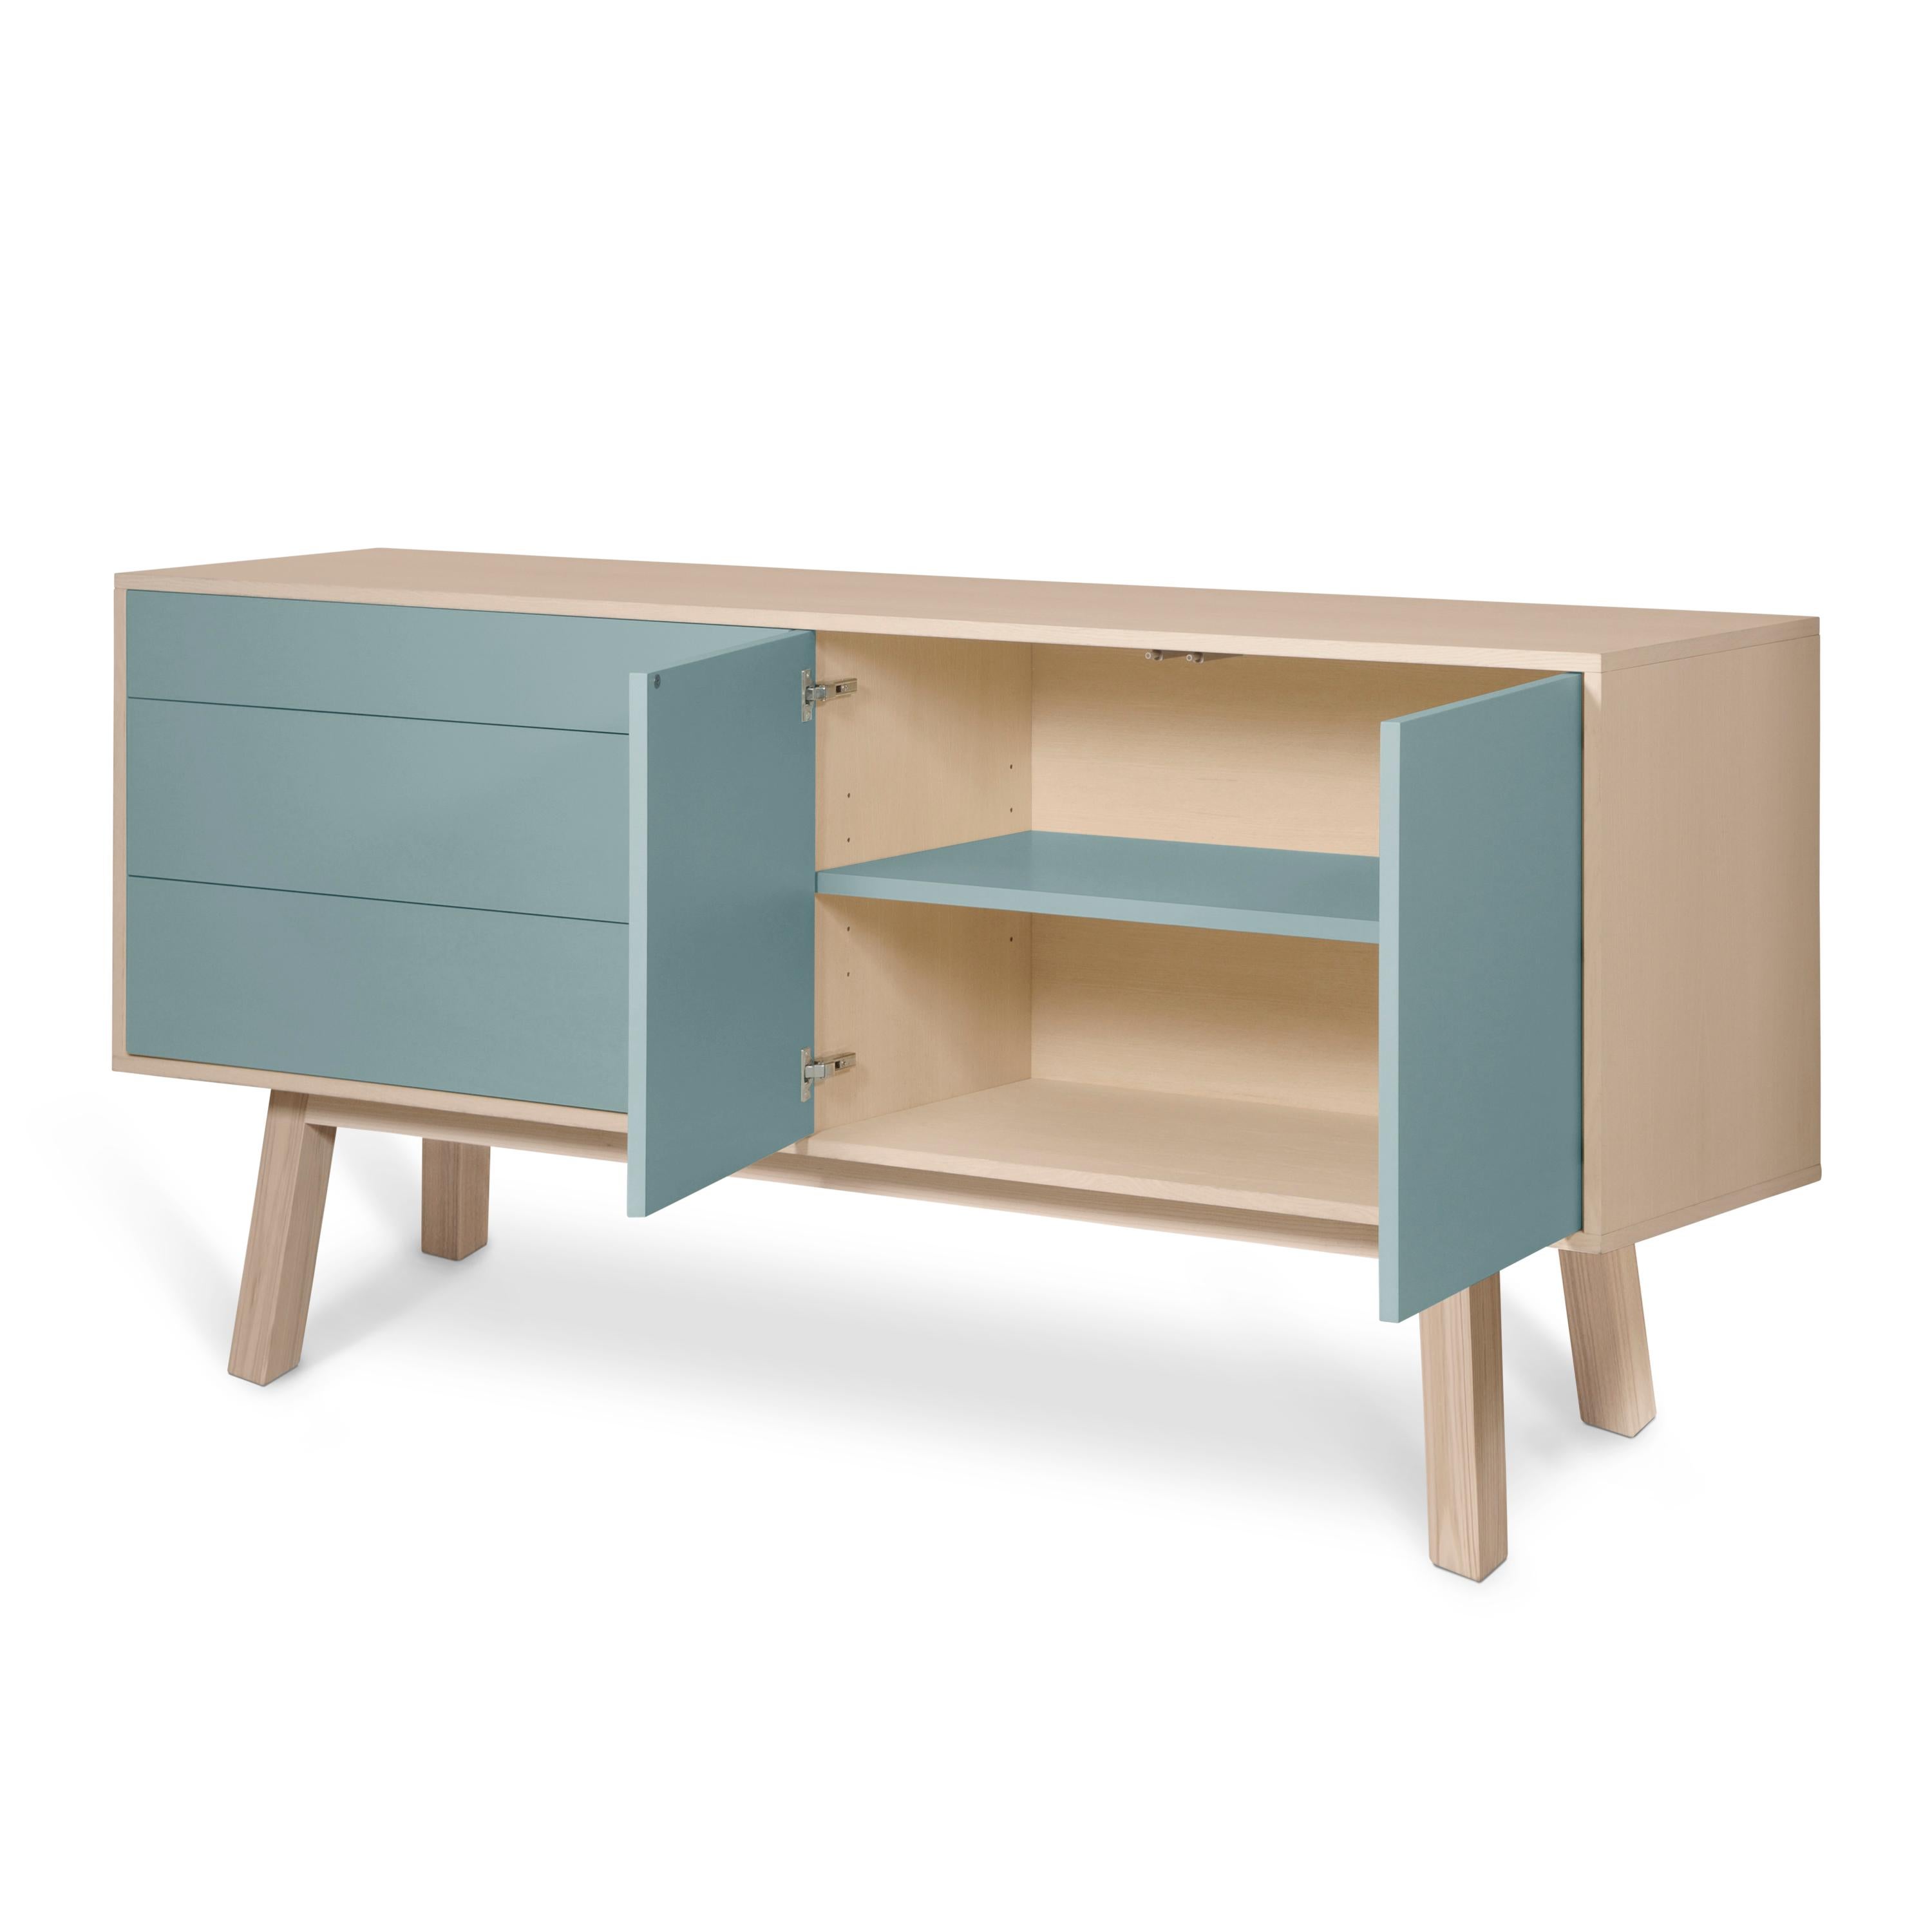 2-Door 3 Drawer High Sideboard in Ash, Design Eric Gizard, Paris Made in France For Sale 2